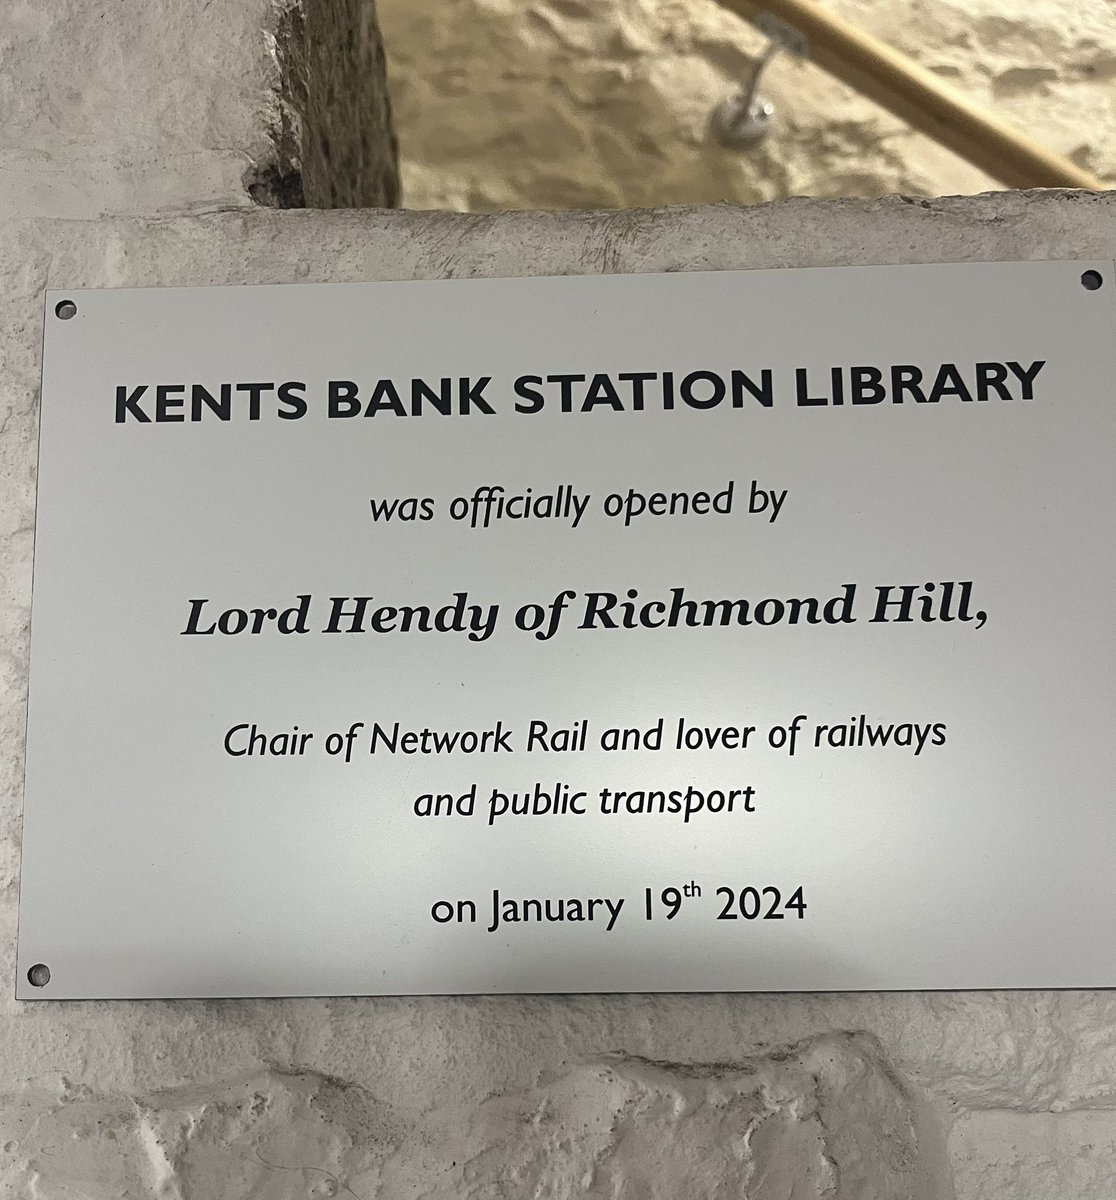 Lovely day for the official opening of #Kentsbank Station Library by @LordPeterHendy … complete with the unveiling of the original station sign! Well done @paulsalveson & thank you for the invitation! My grandson Archie loved the choo choos!